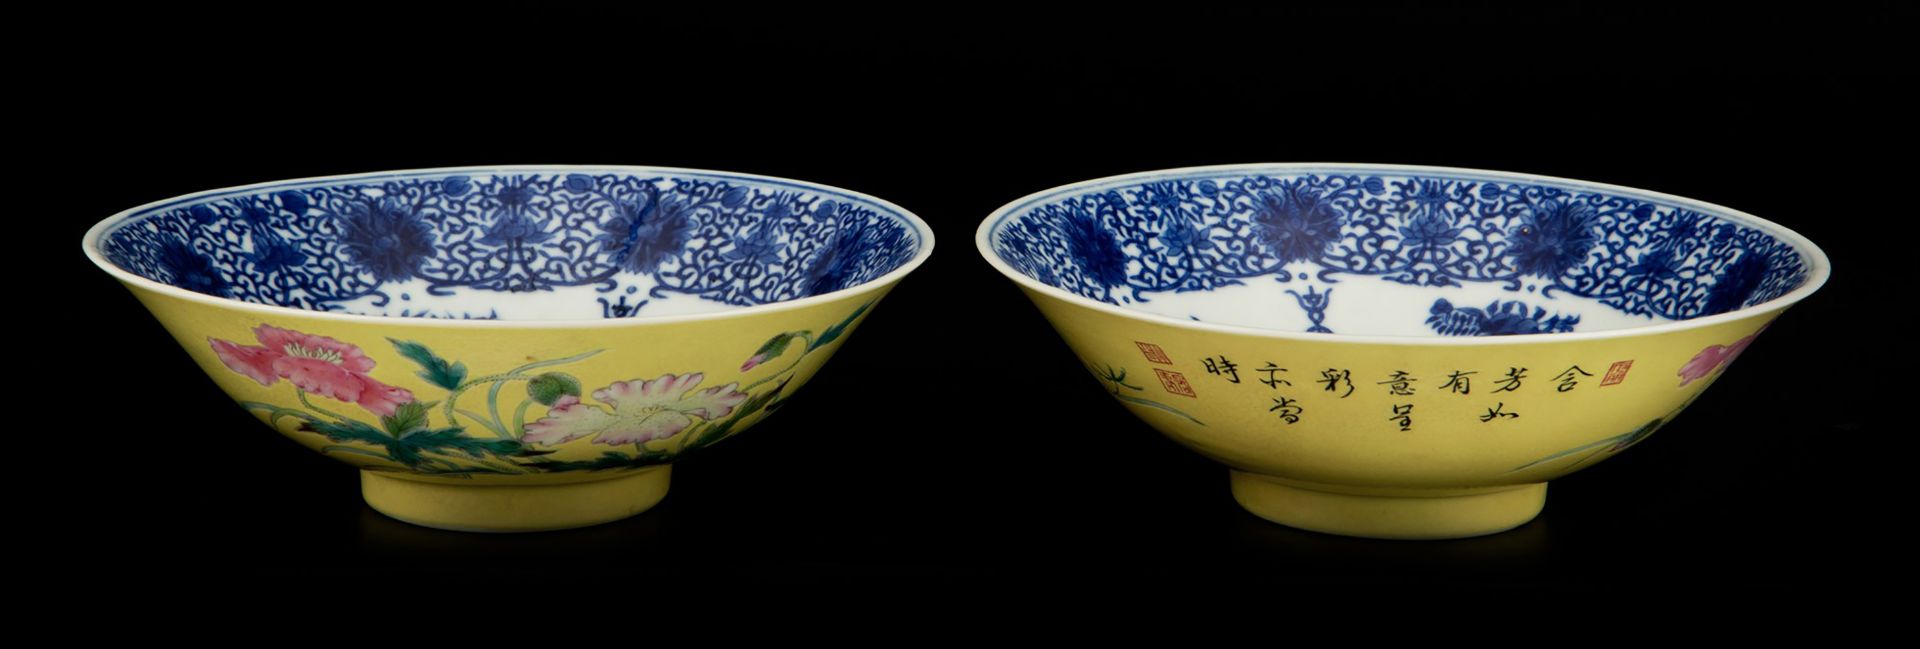 PAIR OF BLUE AND WHITE FAMILLE ROSE YELLOW-GROUND PORCELAIN CUPS d. 15,2